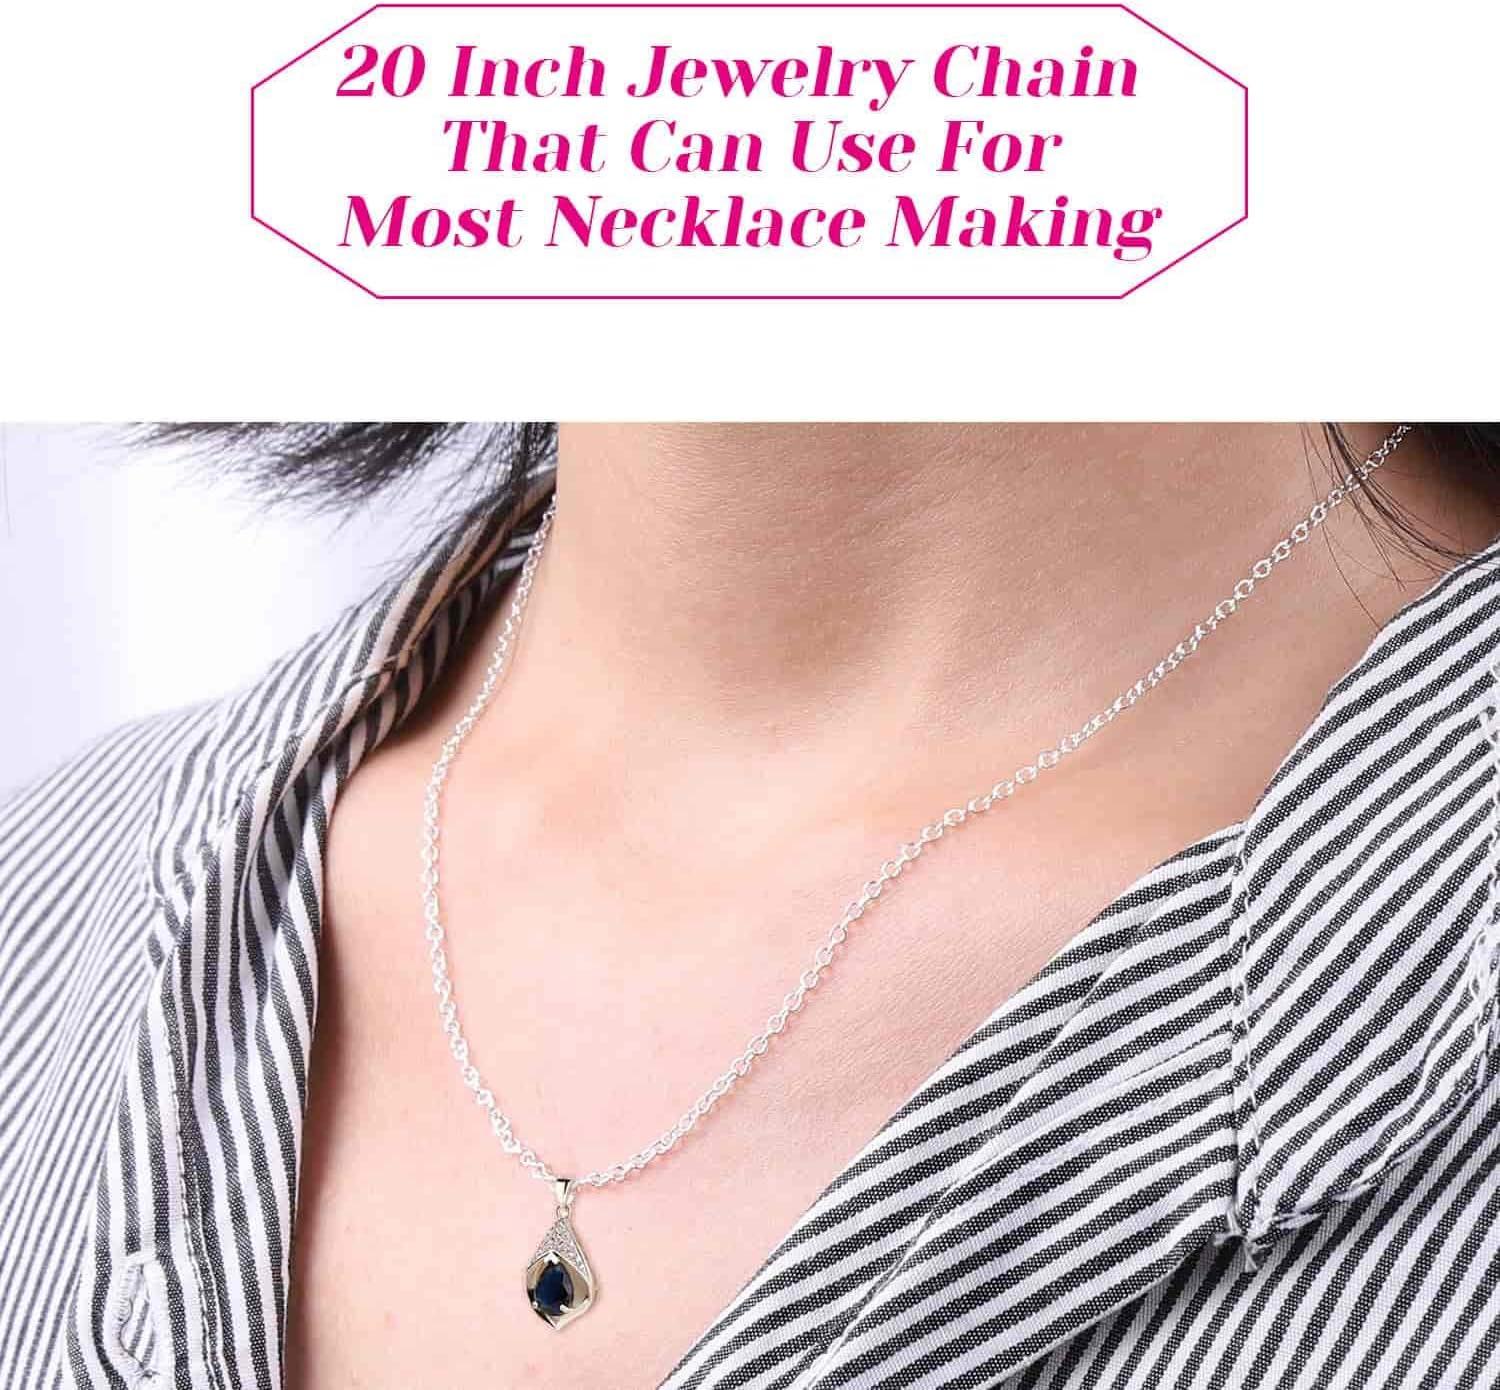 36 Pack Necklace Chain Bulk for Jewelry Making Cridoz Necklace